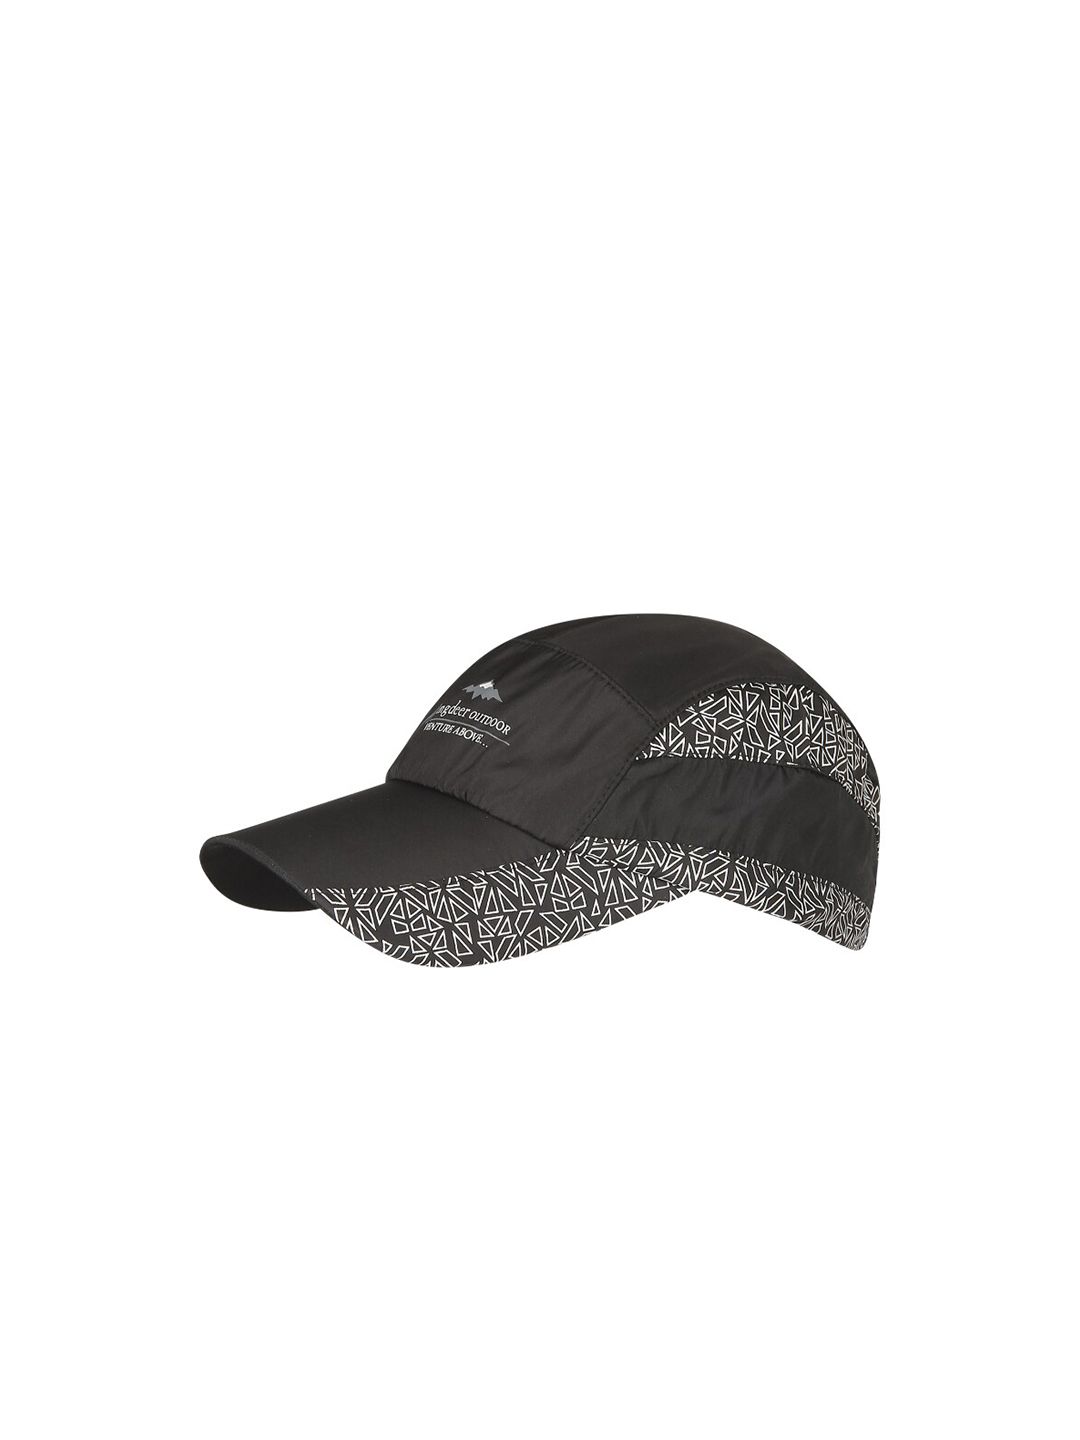 iSWEVEN Black & White Printed Snapback Cap Price in India